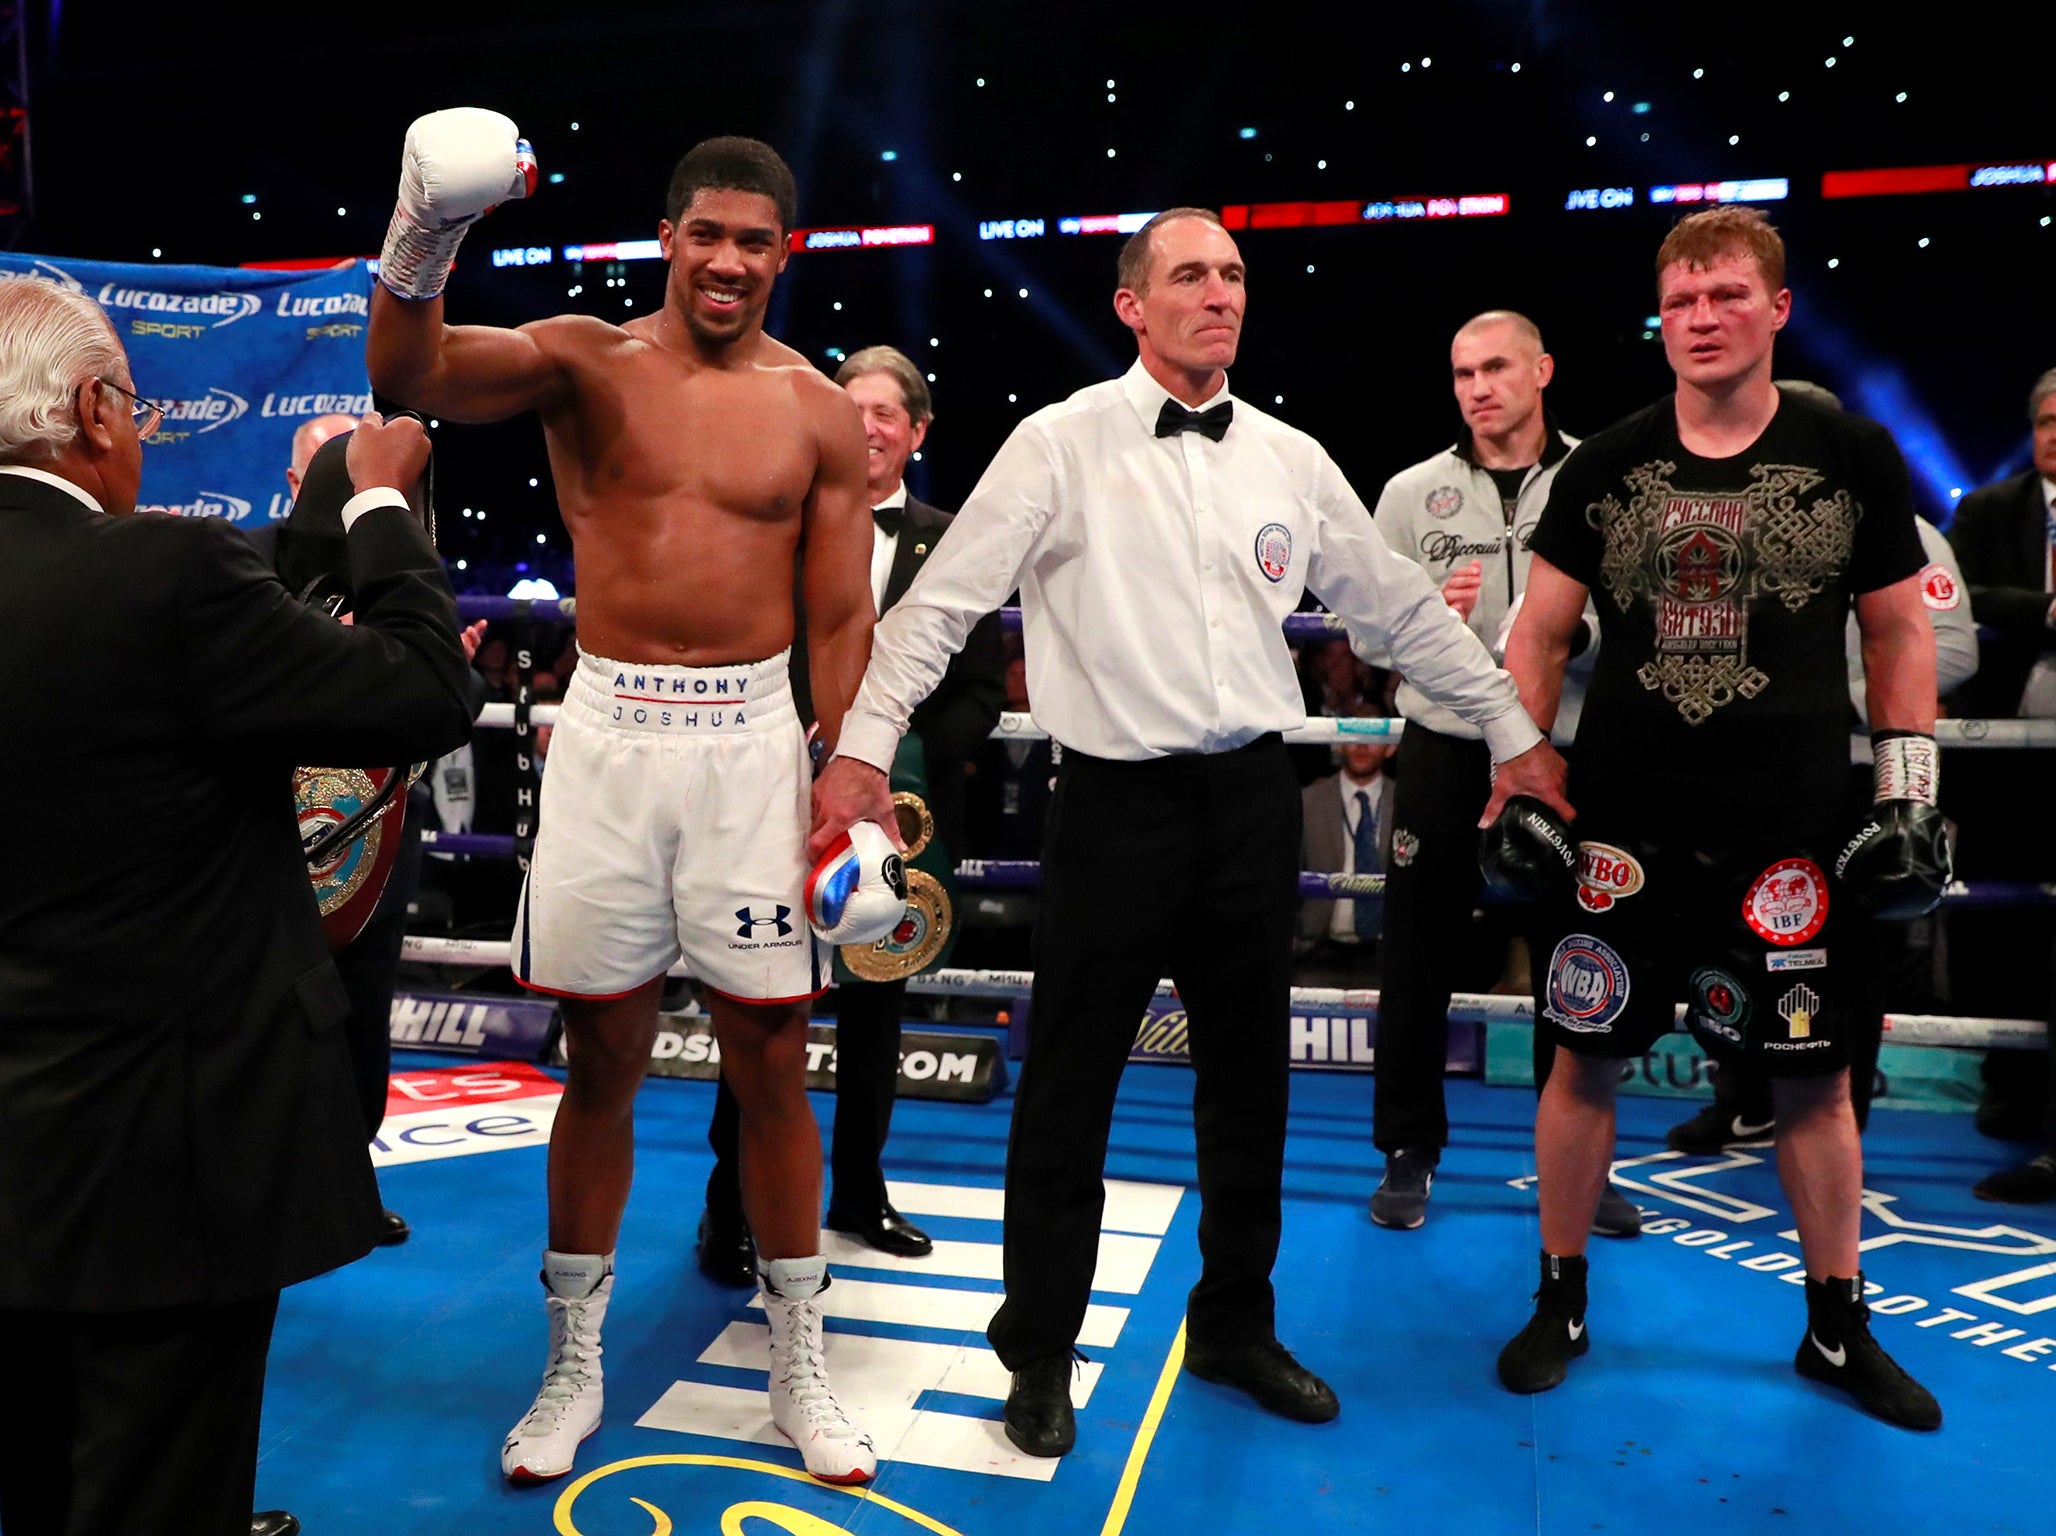 Joshua secured his 22nd professional victory in style on Saturday night